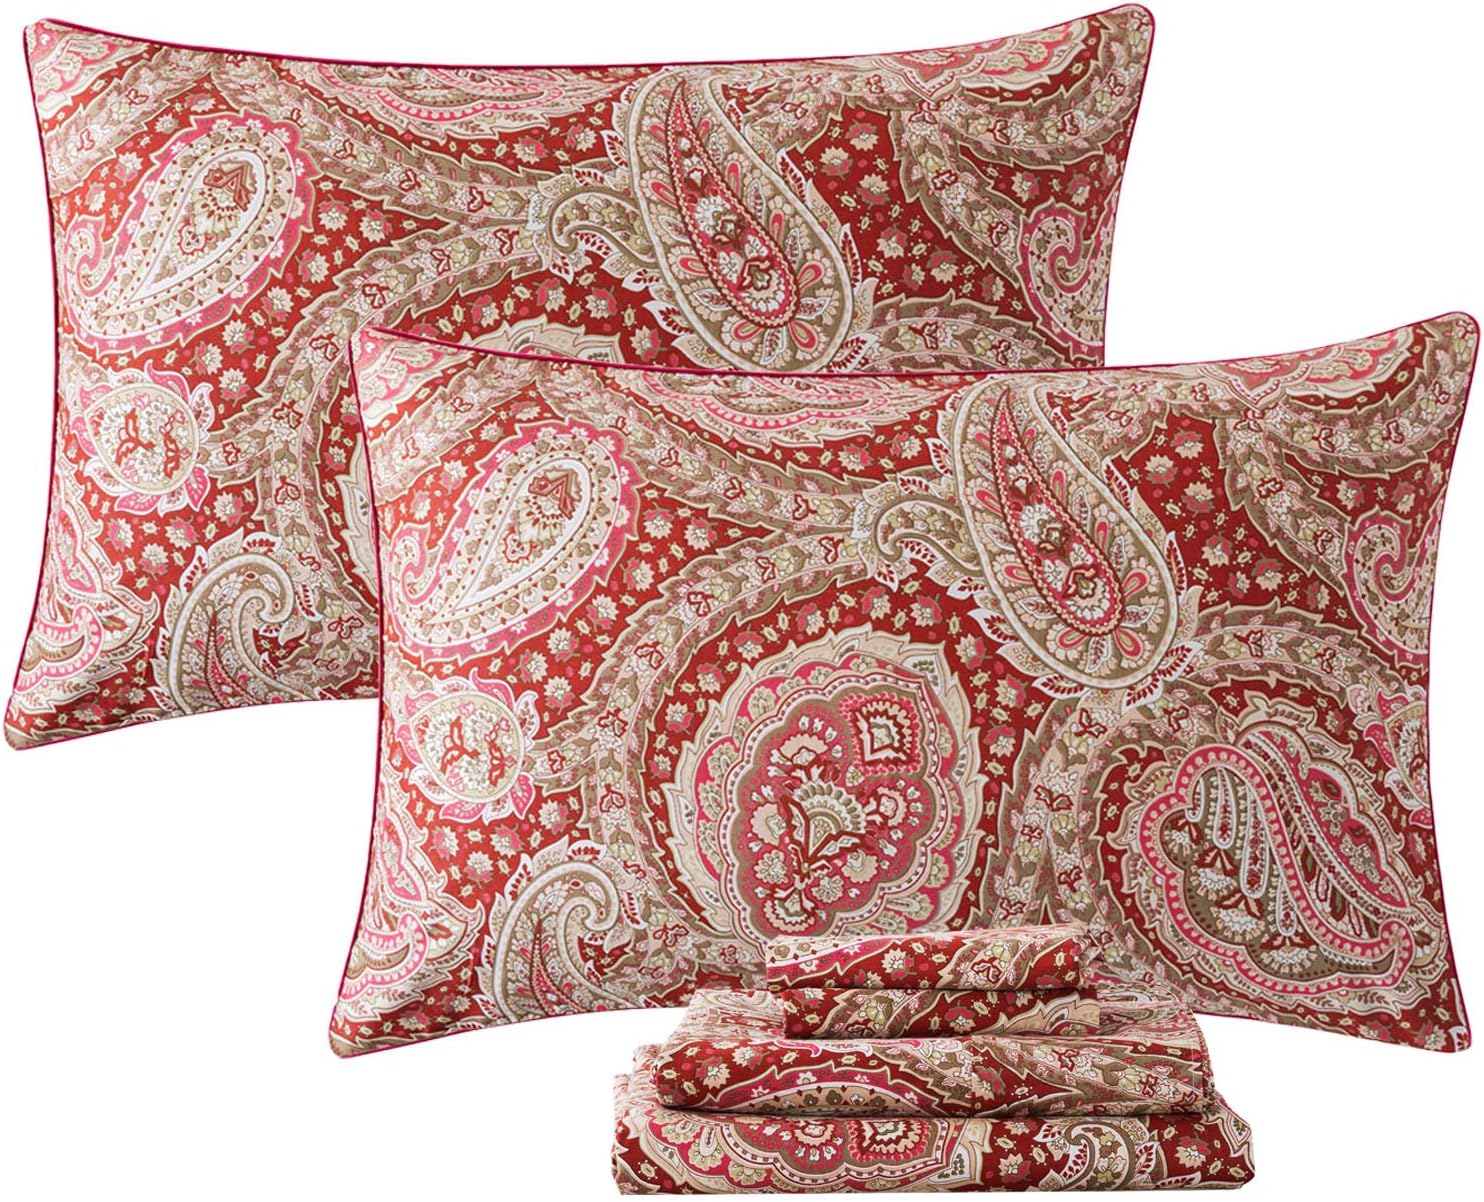 FADFAY Luxury Paisley Sheets Set Queen Classy Red and Gold Floral Farmhouse Bedding Elegent Red Paisley Bedding Set 100% Cotton Super Soft Hypoallergenic Deep Pocket Fitted Sheet 4-Pieces,Queen Size